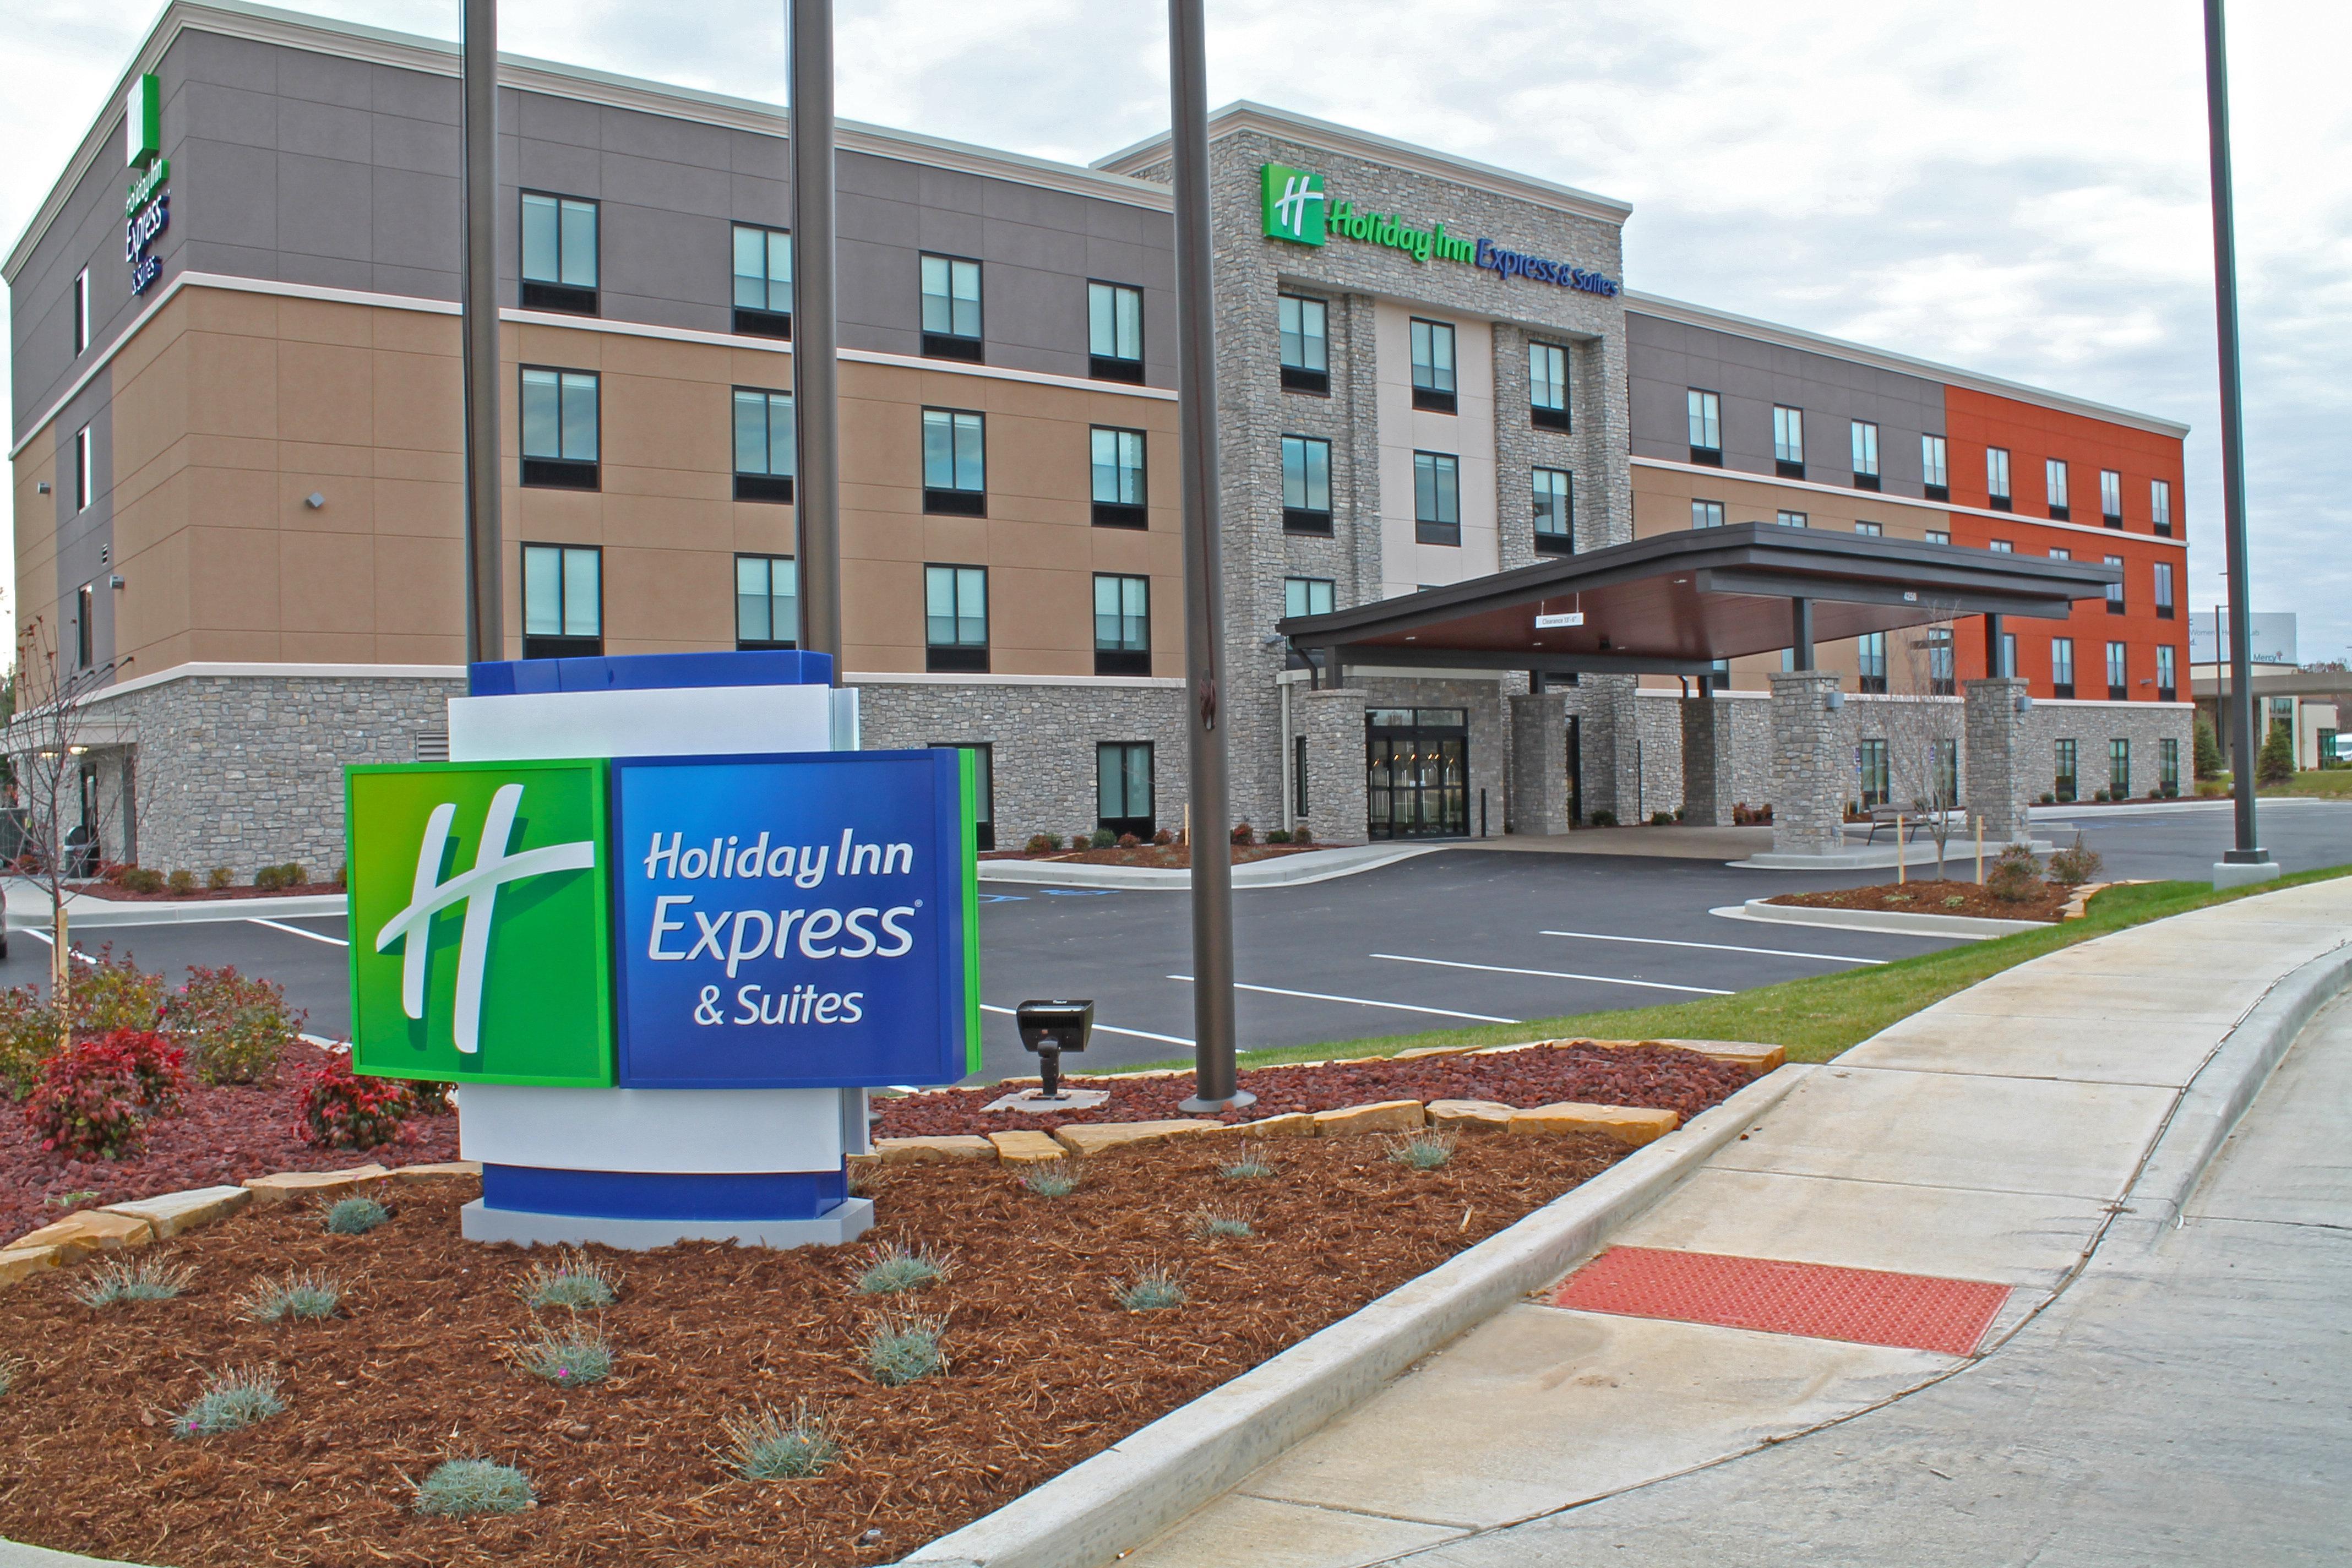 HOTEL HOLIDAY INN EXPRESS & SUITES ST. LOUIS SOUTH - I-55 SAINT LOUIS, MO  3* (United States) - from C$ 226 | iBOOKED